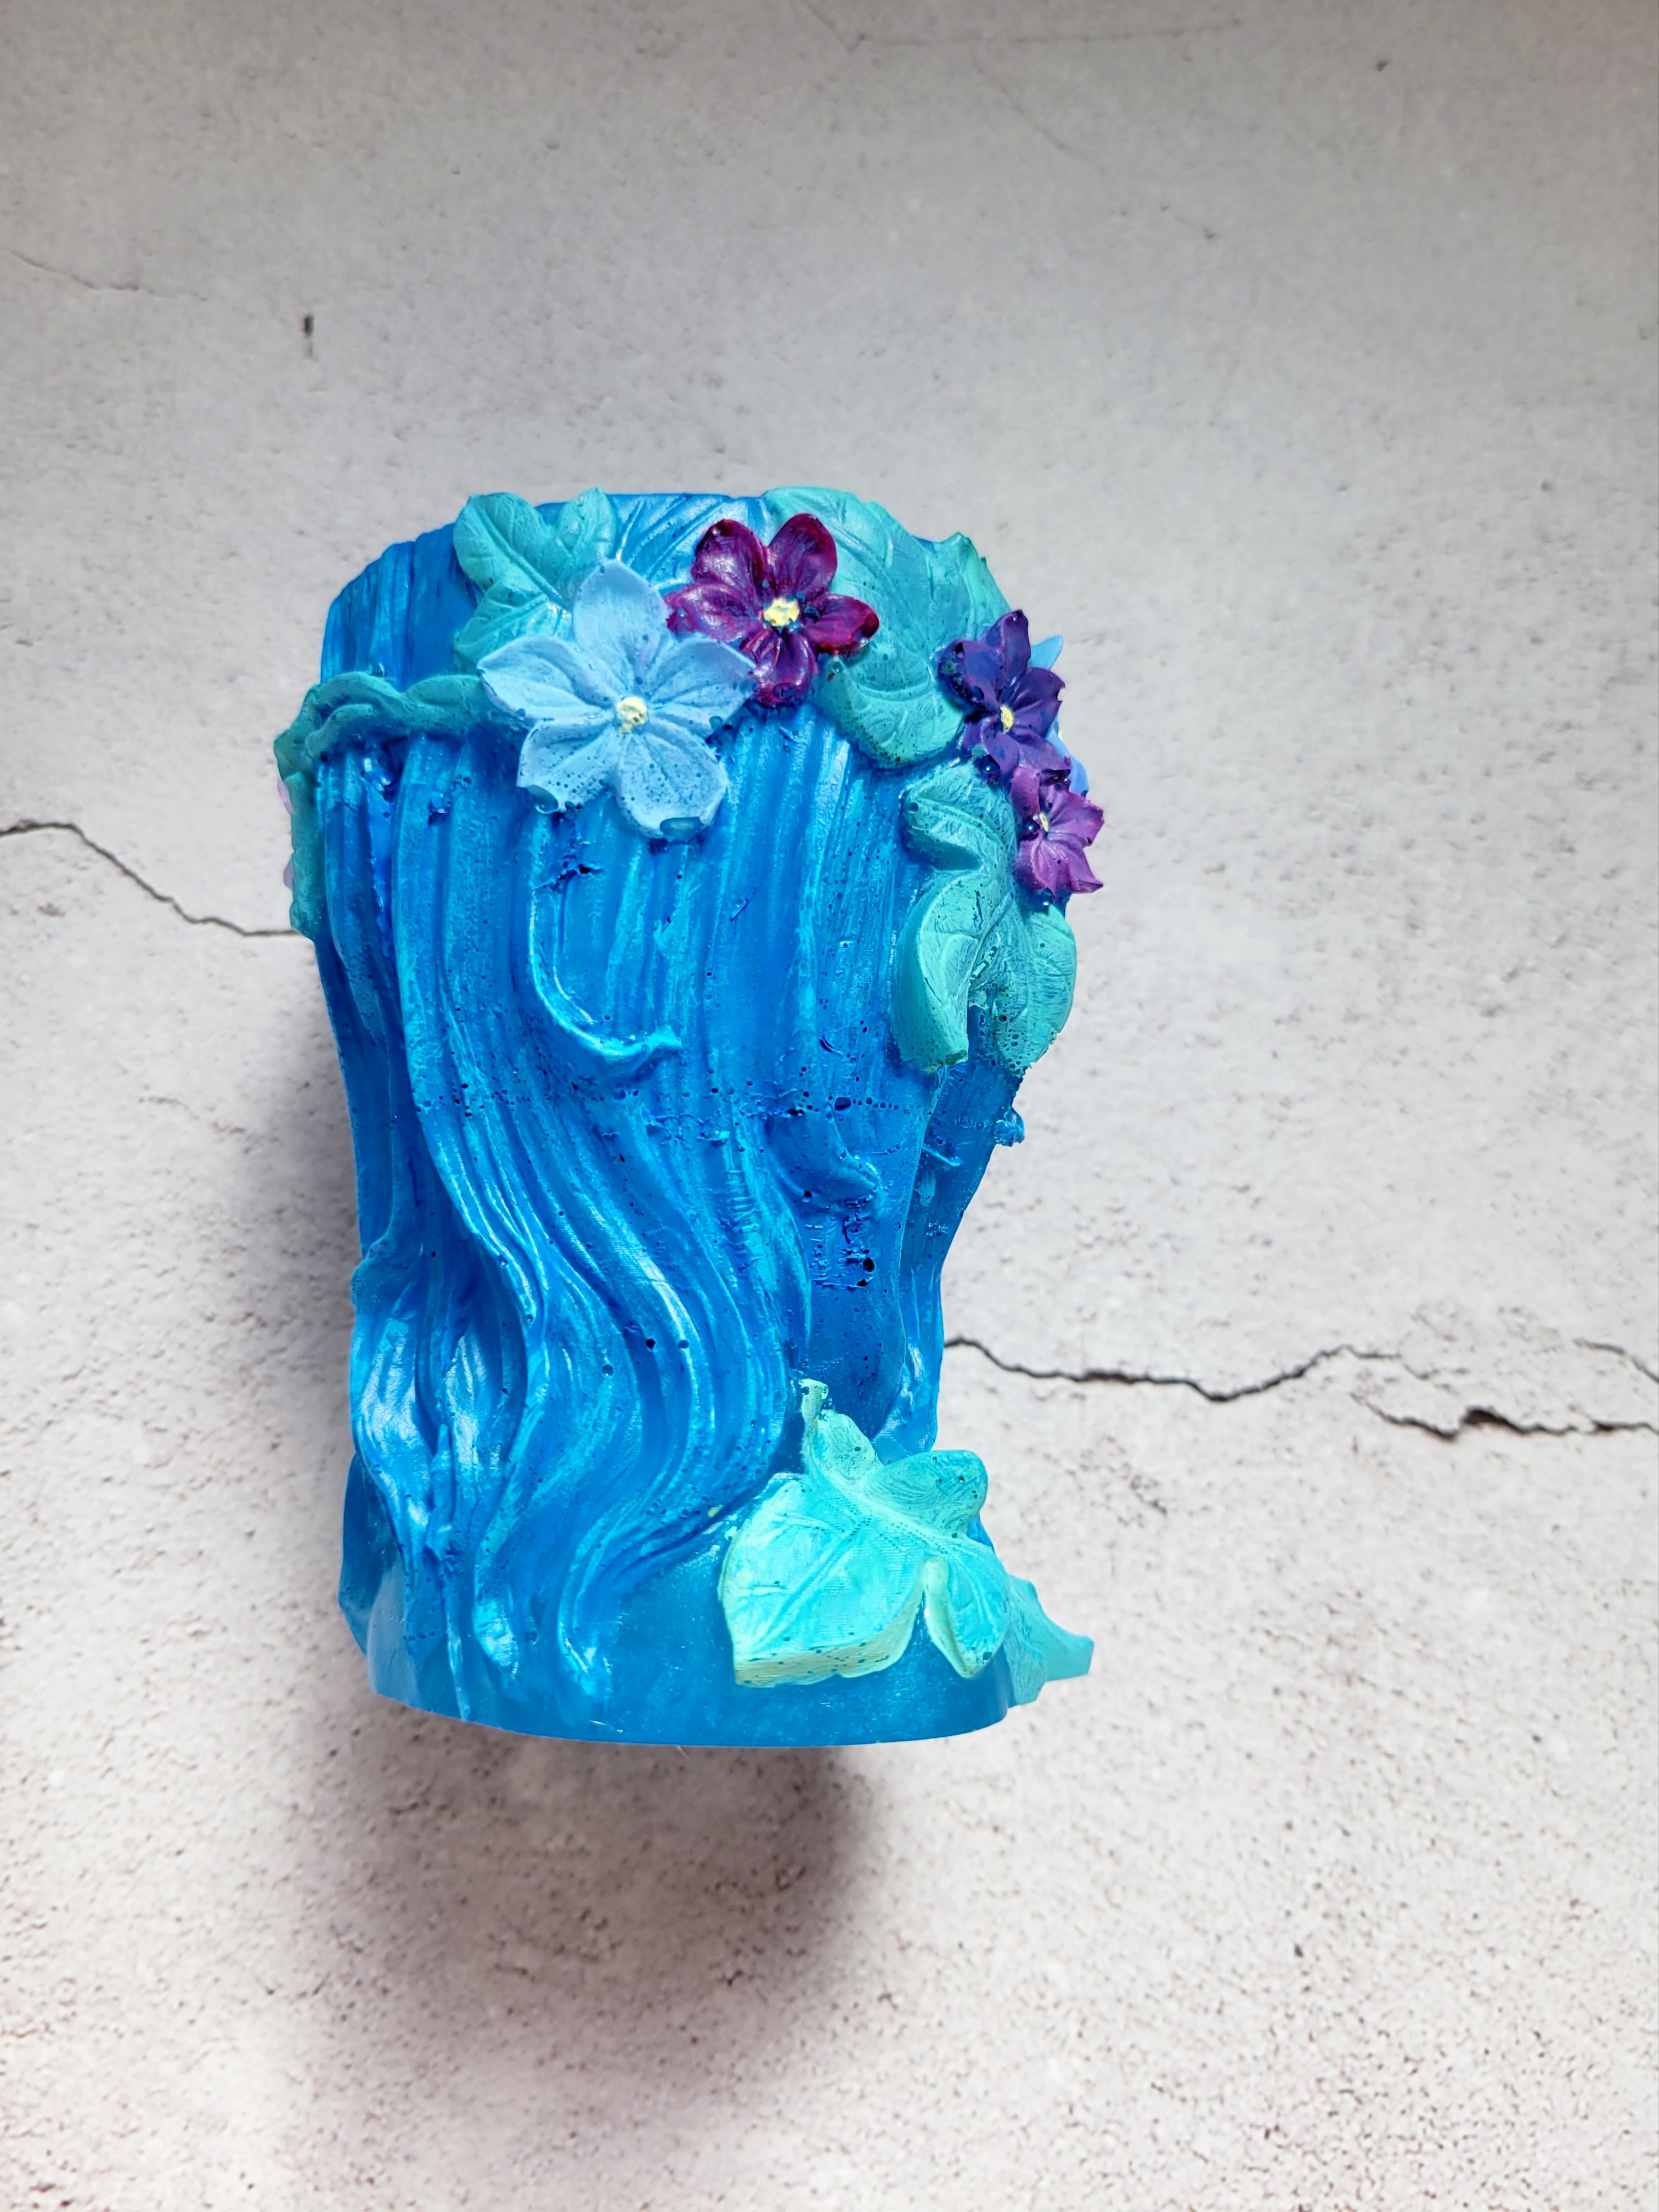 a resin made female ancient statue bust, blue in color with painted leaves and flowers. side view